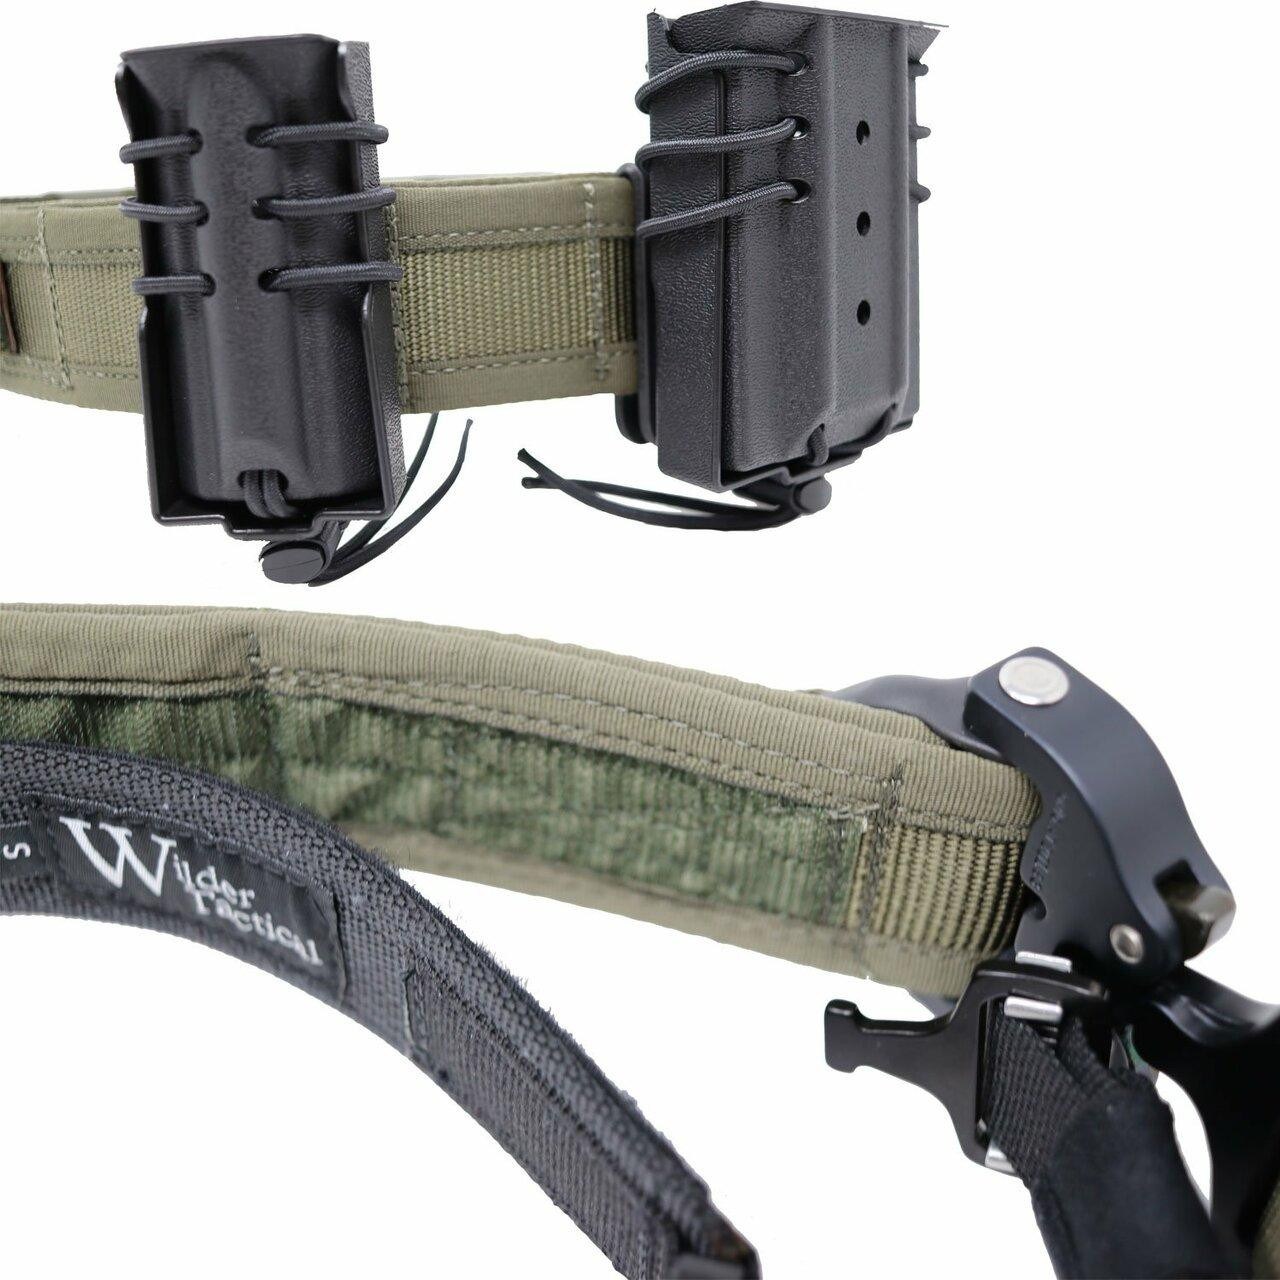 Wilder Tactical - Minimalist MOLLE Belt Mod UBL Rotating Double Pistol  Extended 📸 @flashpoint_actual . . . #rltw #wildertactical #lawenforcement  #military #madeinamerica #tactical